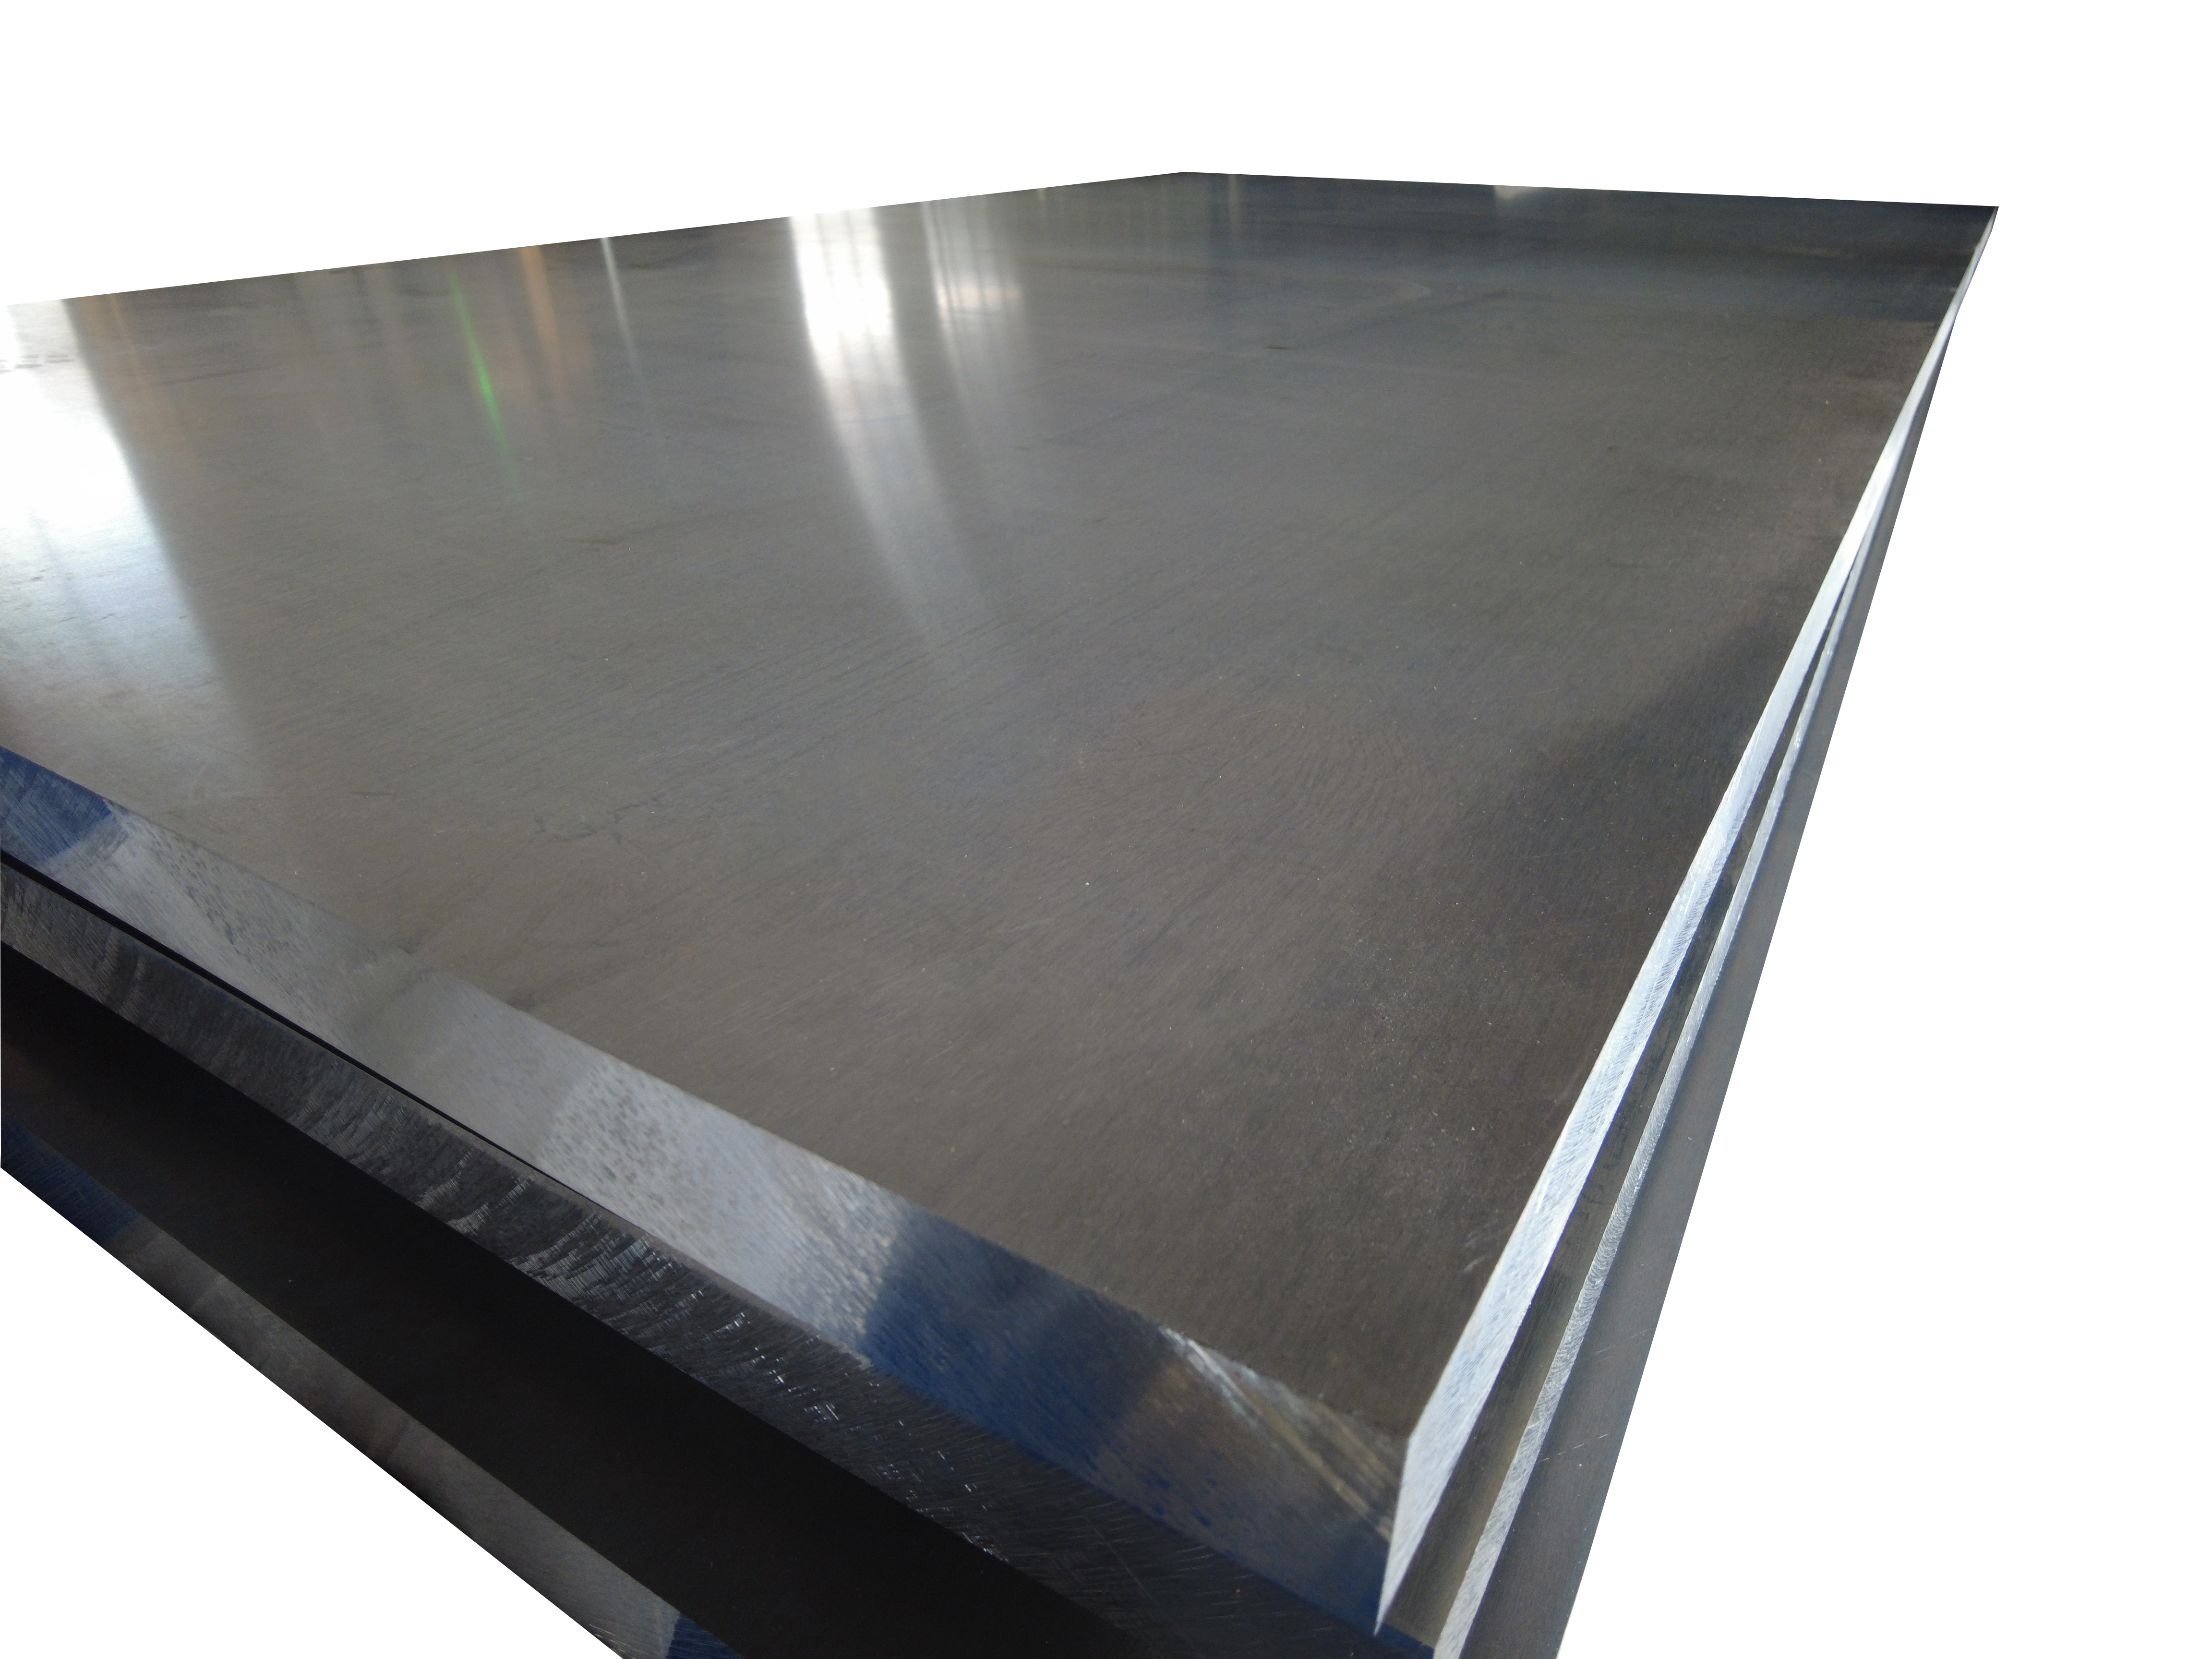 Factory Outlets 30mm Aluminum Plate - Aircraft Usage 2024 T351 Aluminum Alloy Plate – Miandi